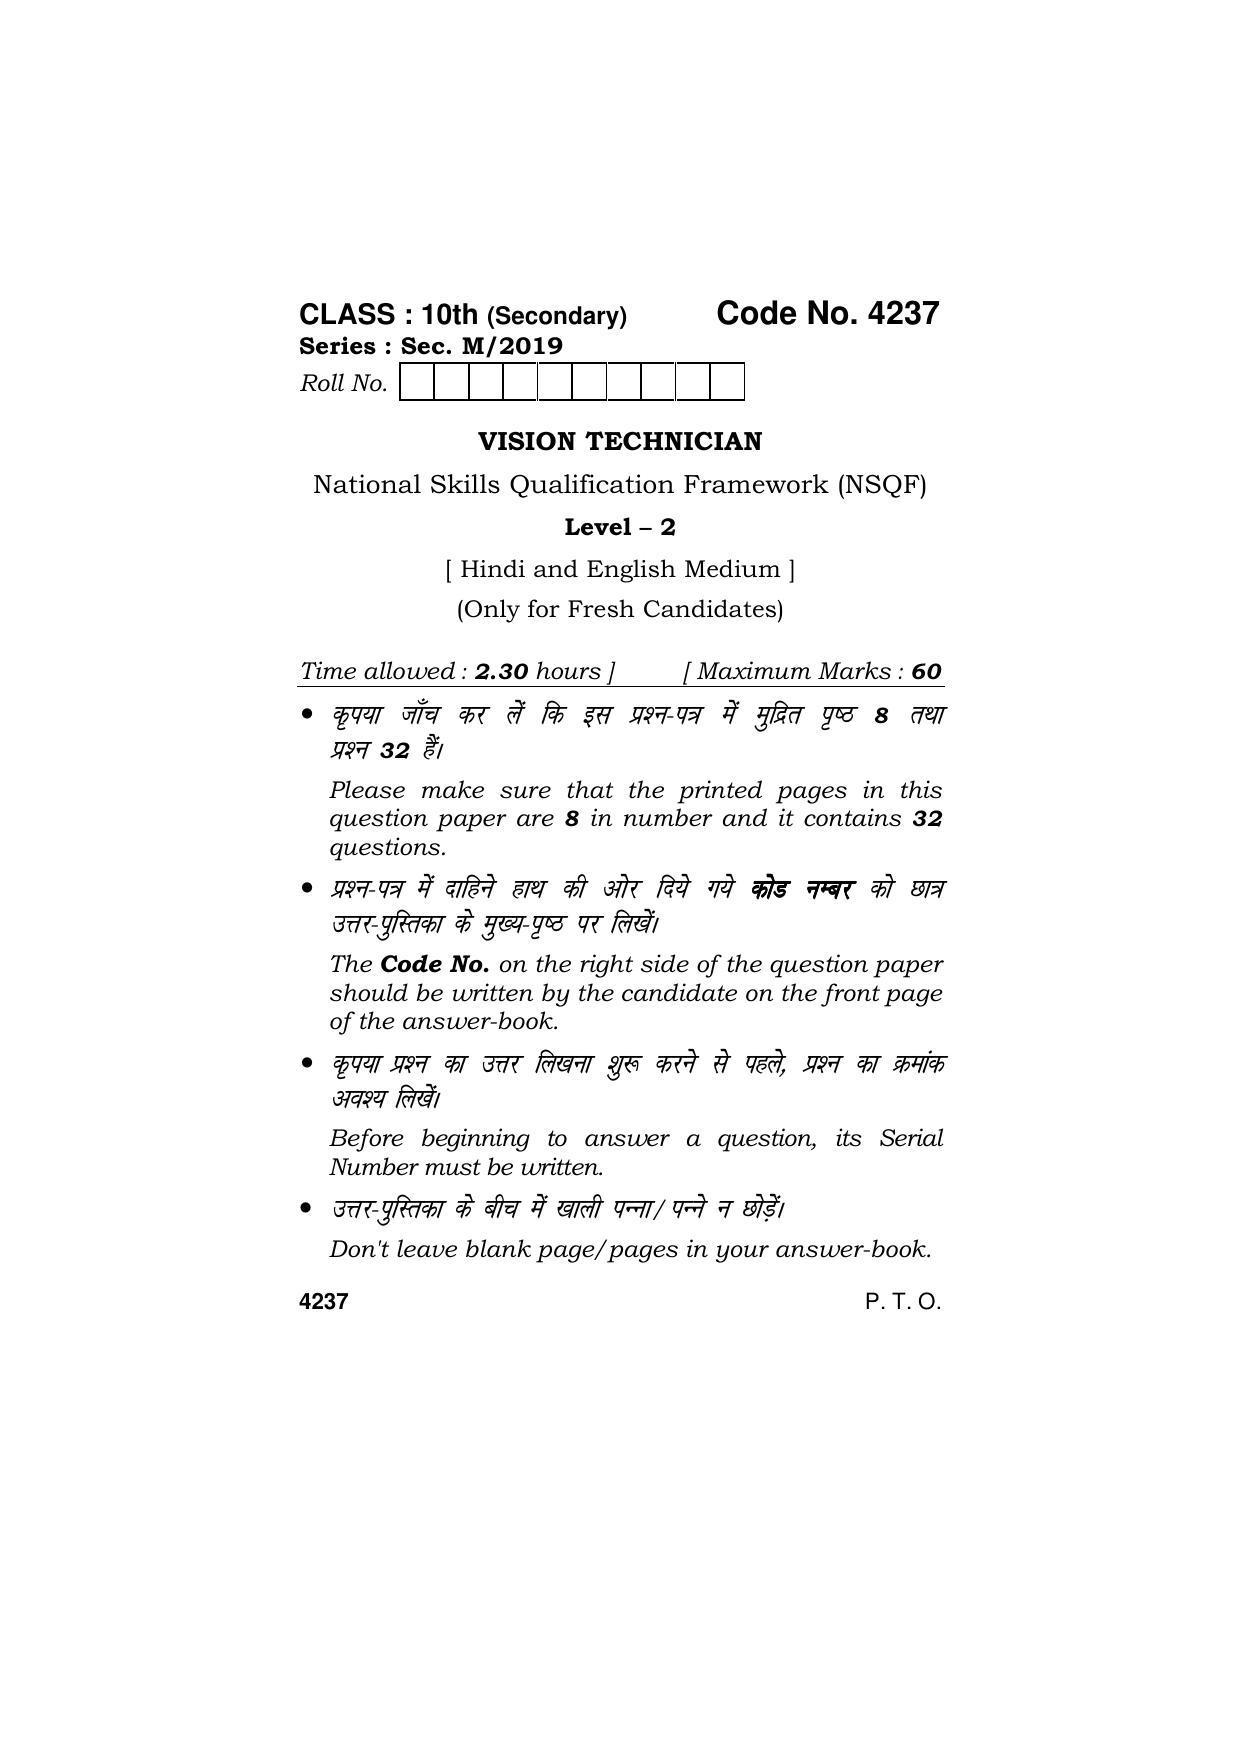 Haryana Board HBSE Class 10 Vision Technician 2019 Question Paper - Page 1